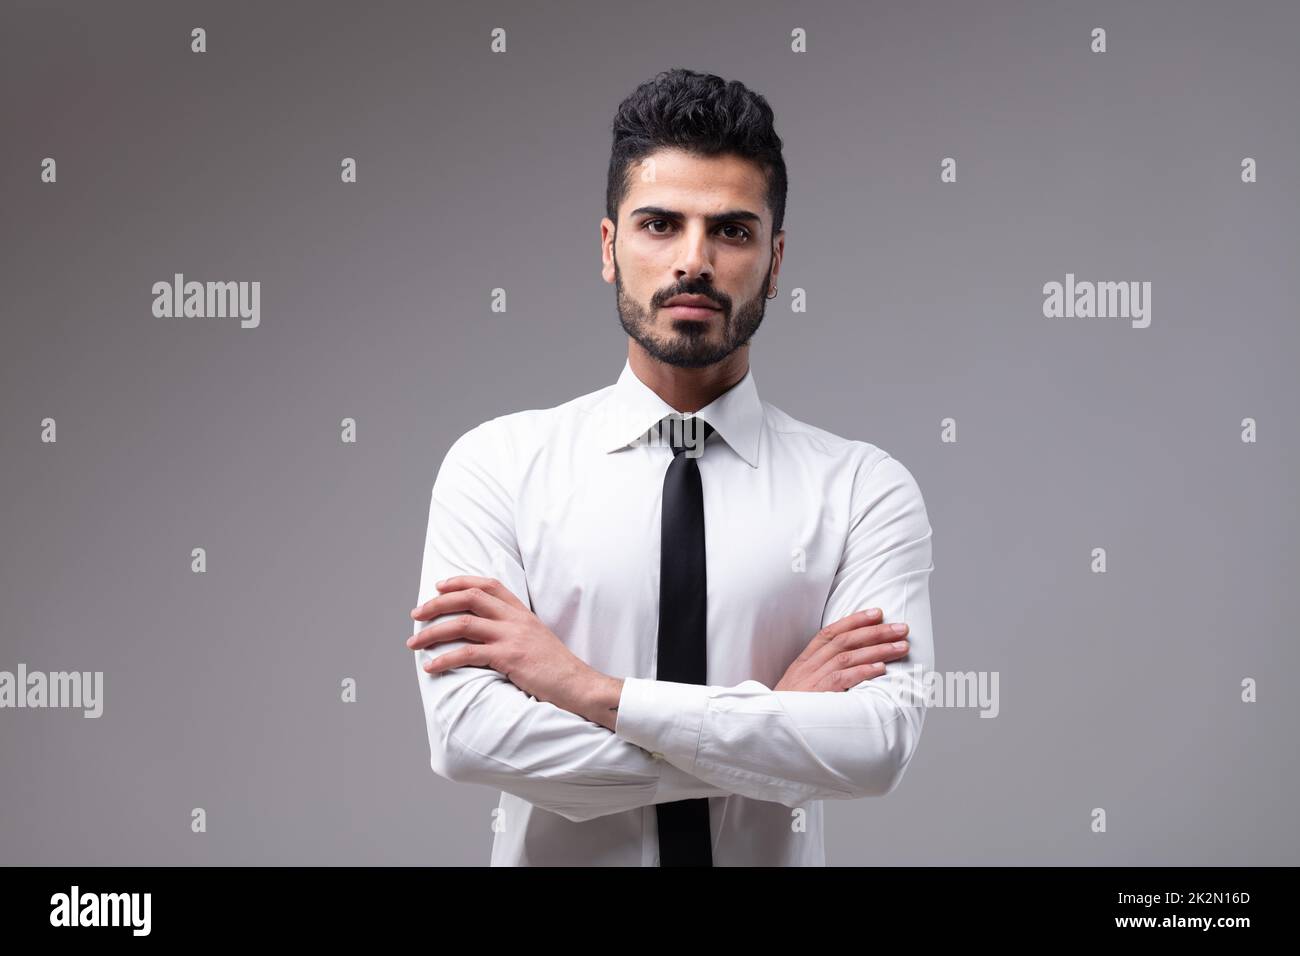 Young bossy man with white shirt and necktie Stock Photo